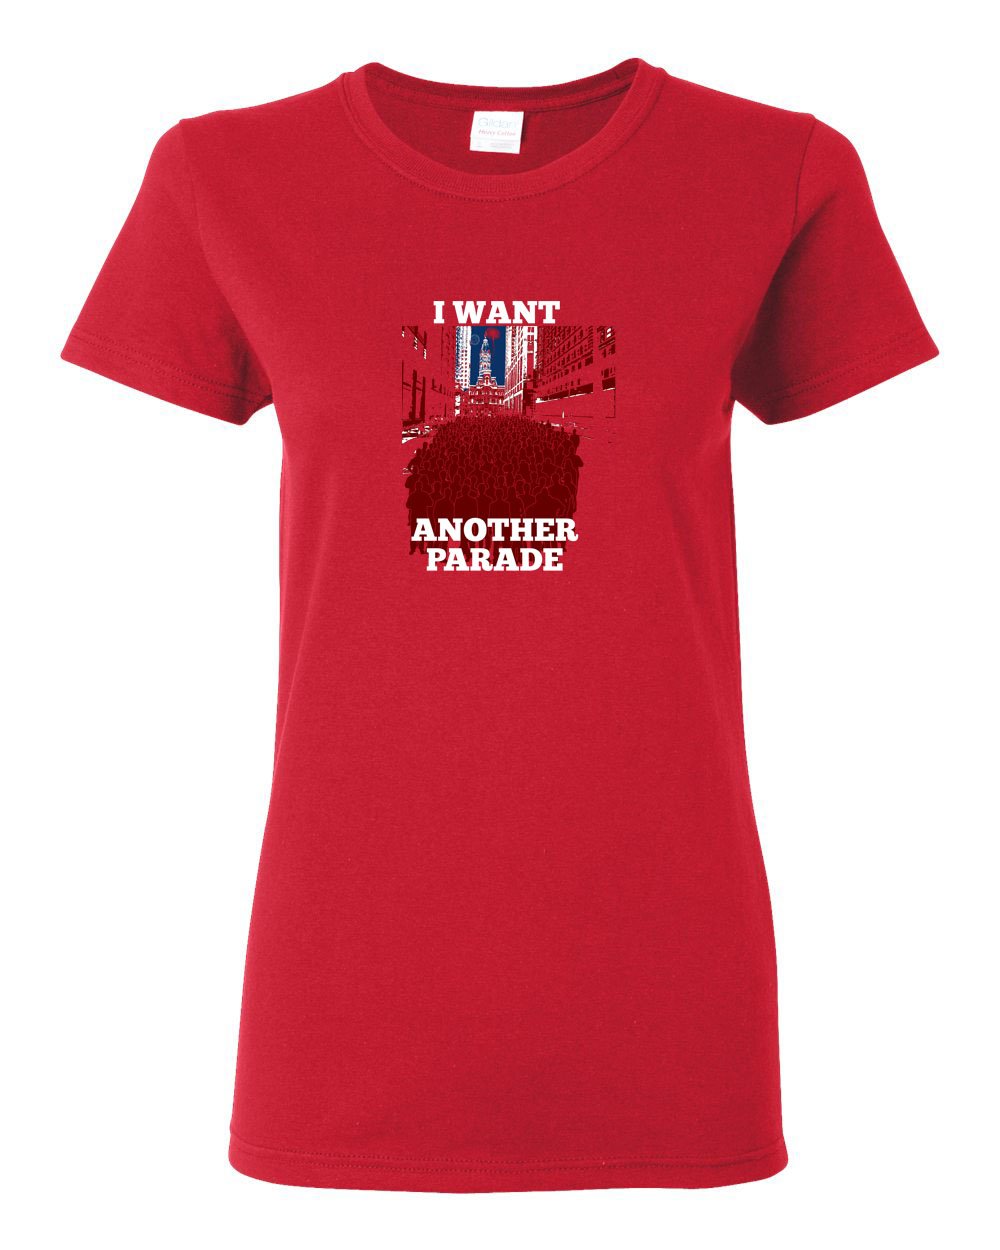 I Want Another Parade LADIES Missy-Fit T-Shirt